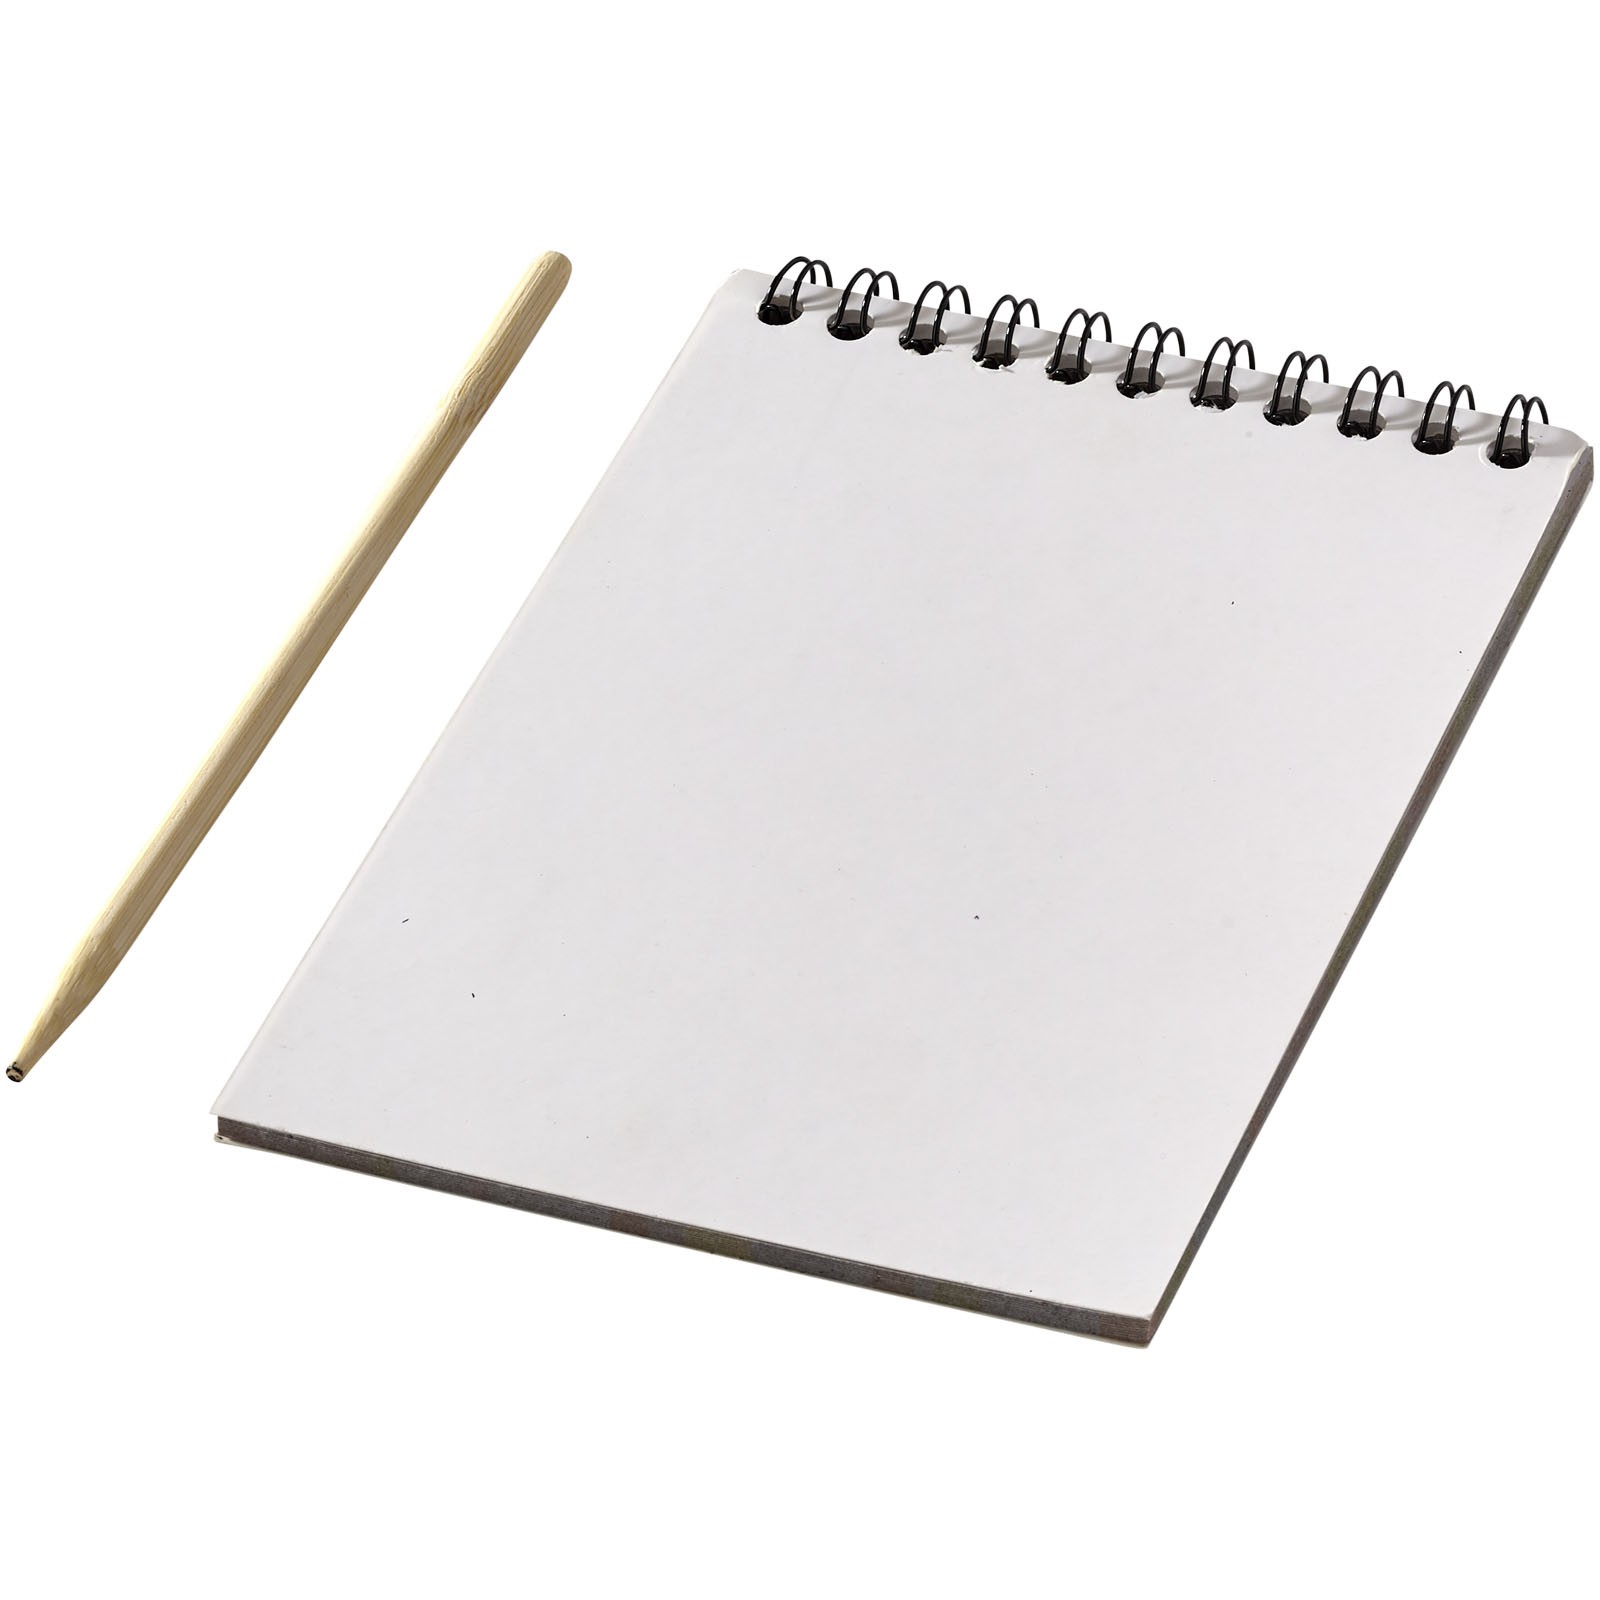 waynon-colourful-scratch-pad-with-scratch-pen-white-10705500-hd - Anannt